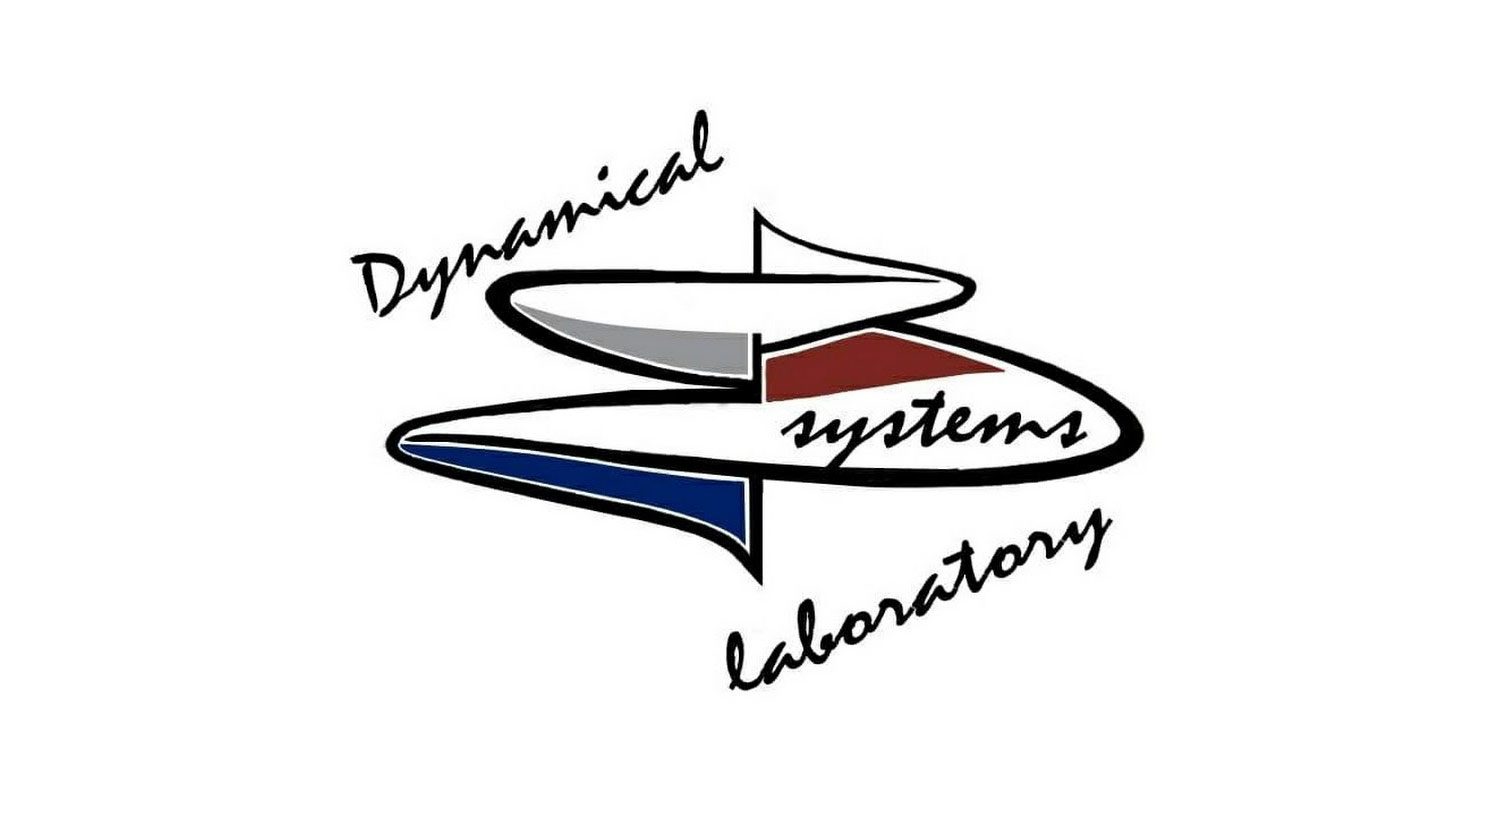 Dynamical Systems Laboratory